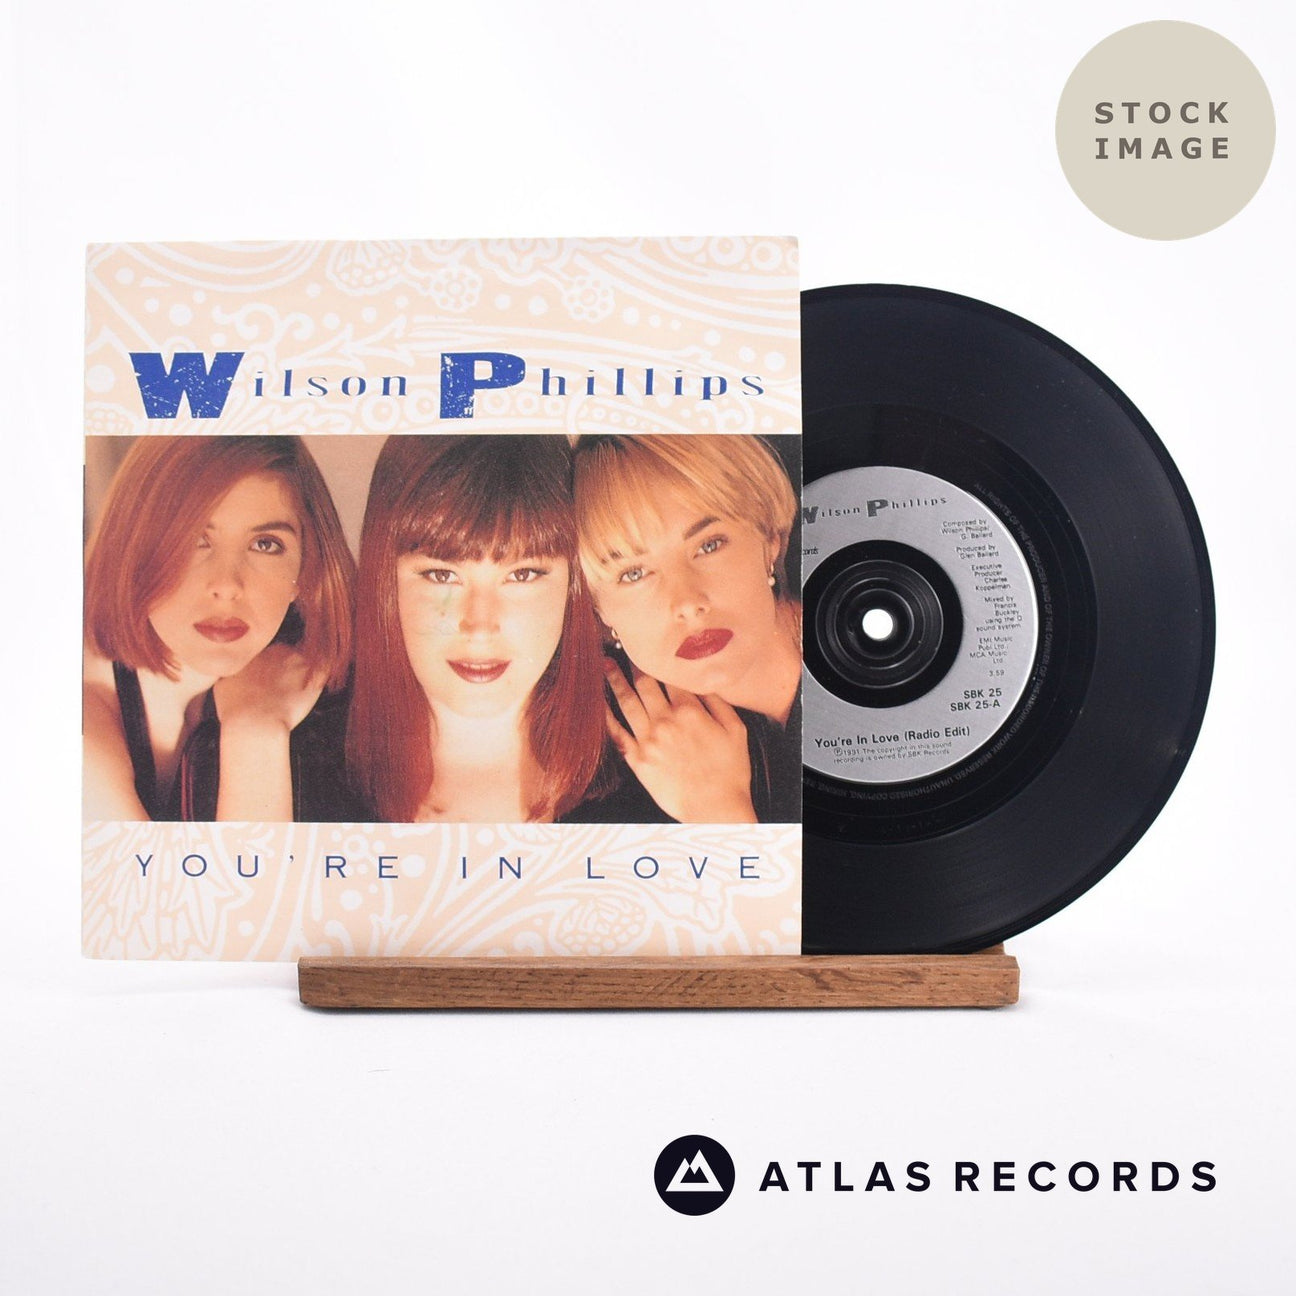 Wilson Phillips You're In Love 7" Vinyl Record - Sleeve & Record Side-By-Side